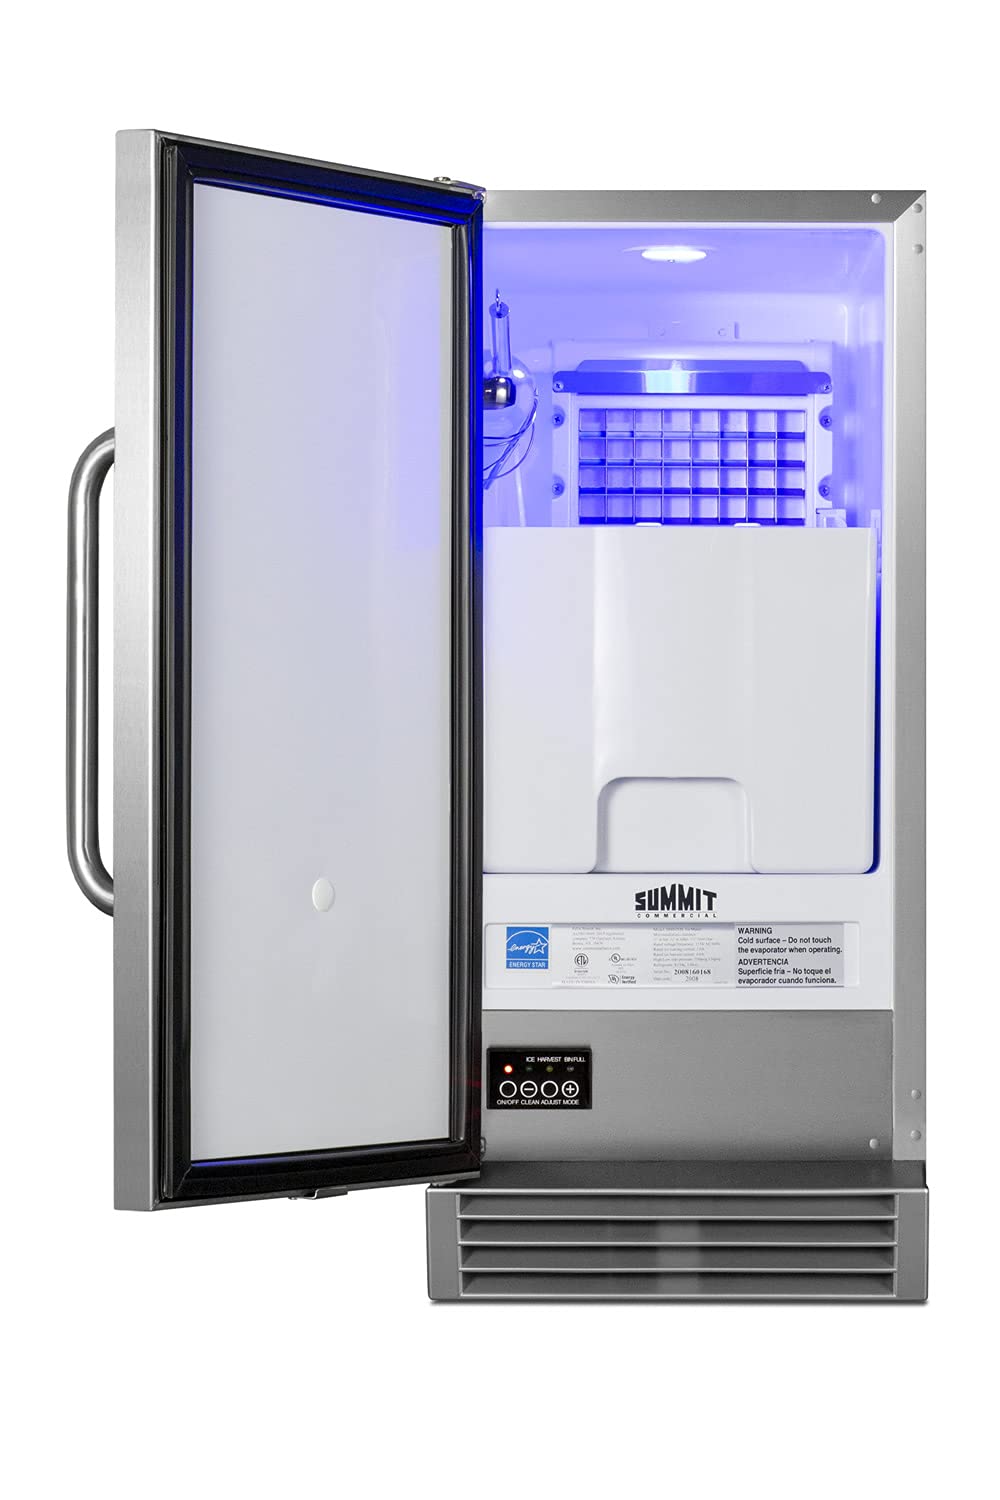 Summit Appliance BIM47OSADA Built-in Icemaker, ADA Compliant, Weatherproof Design, 50 lb Production Capacity, Automatic Defrost, Touch Control Panel, Interior Light, Leveling Legs, Built-in Pump